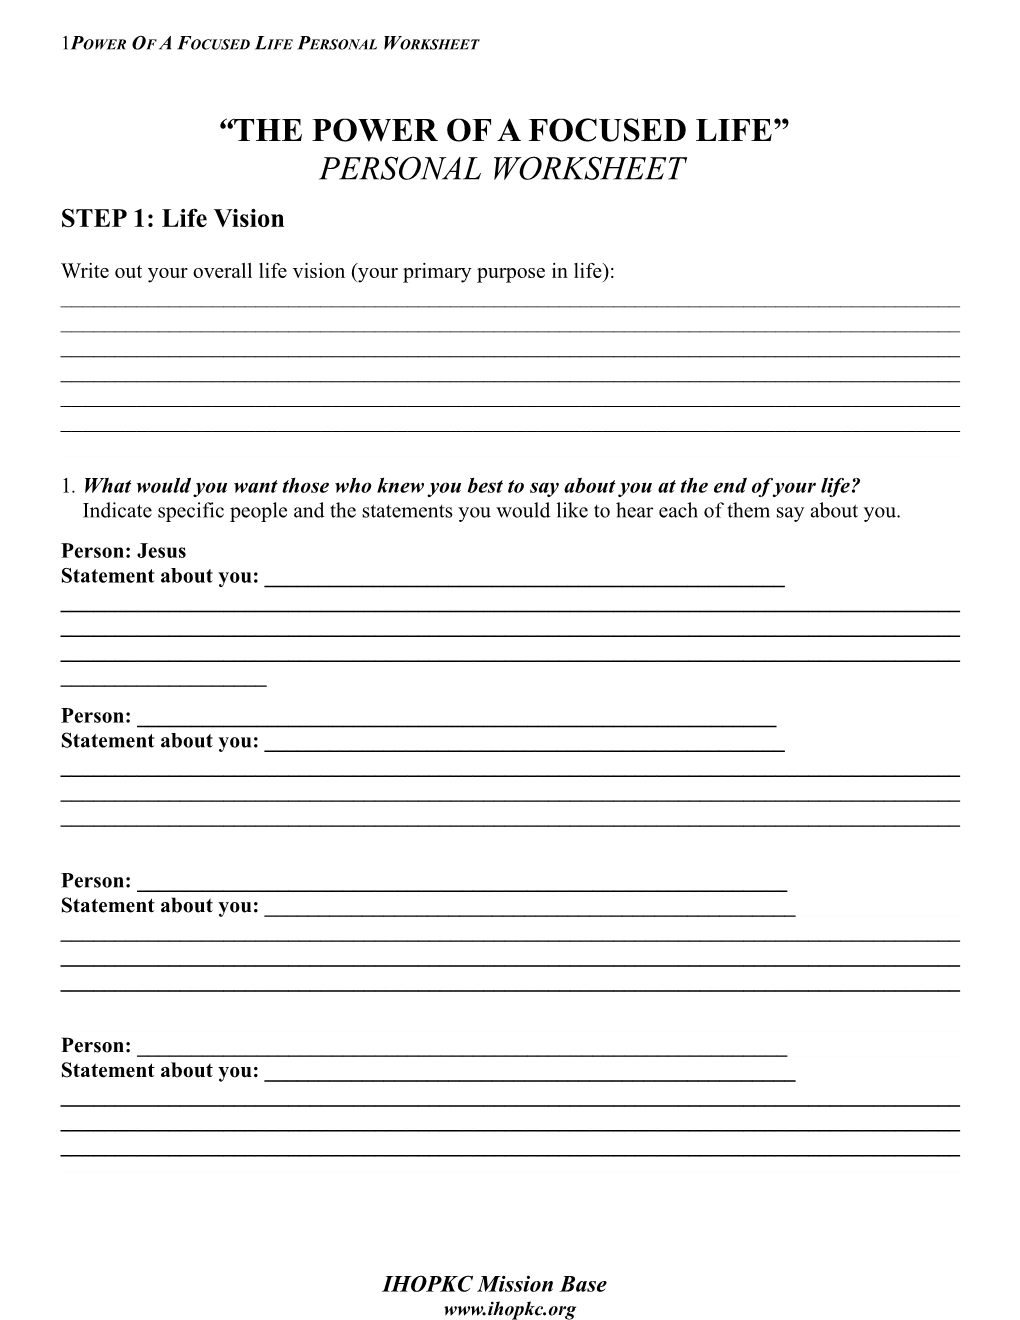 Power of a Focused Life Personal Worksheet